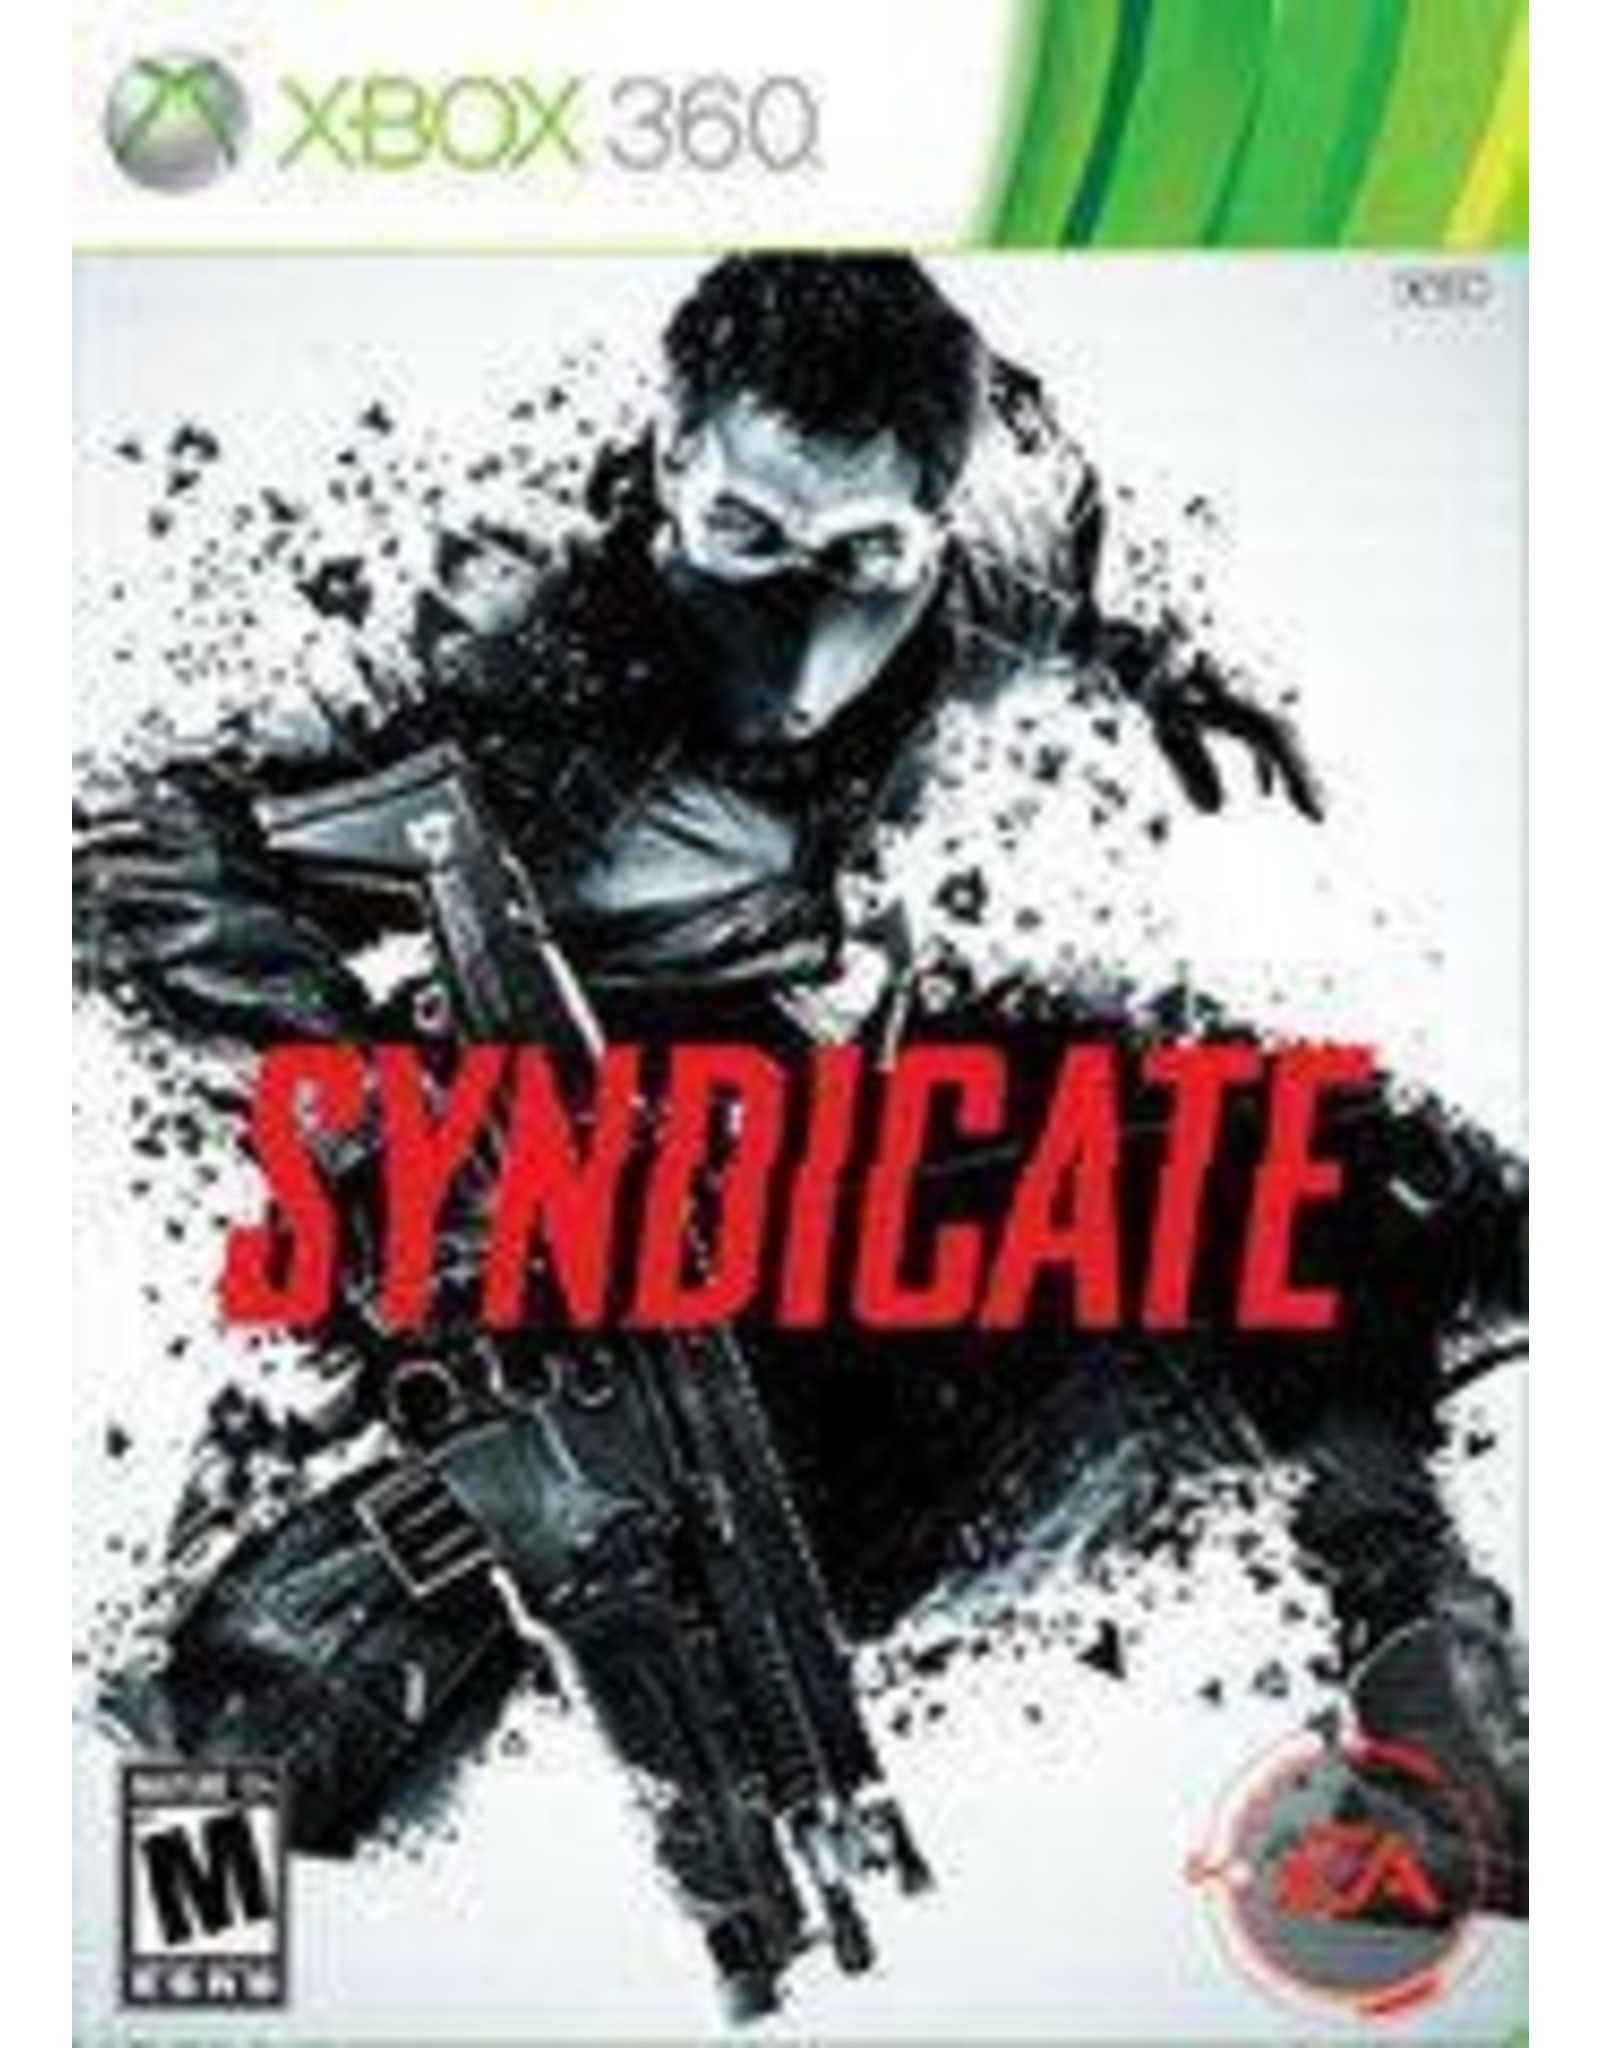 Xbox 360 Syndicate (Used)